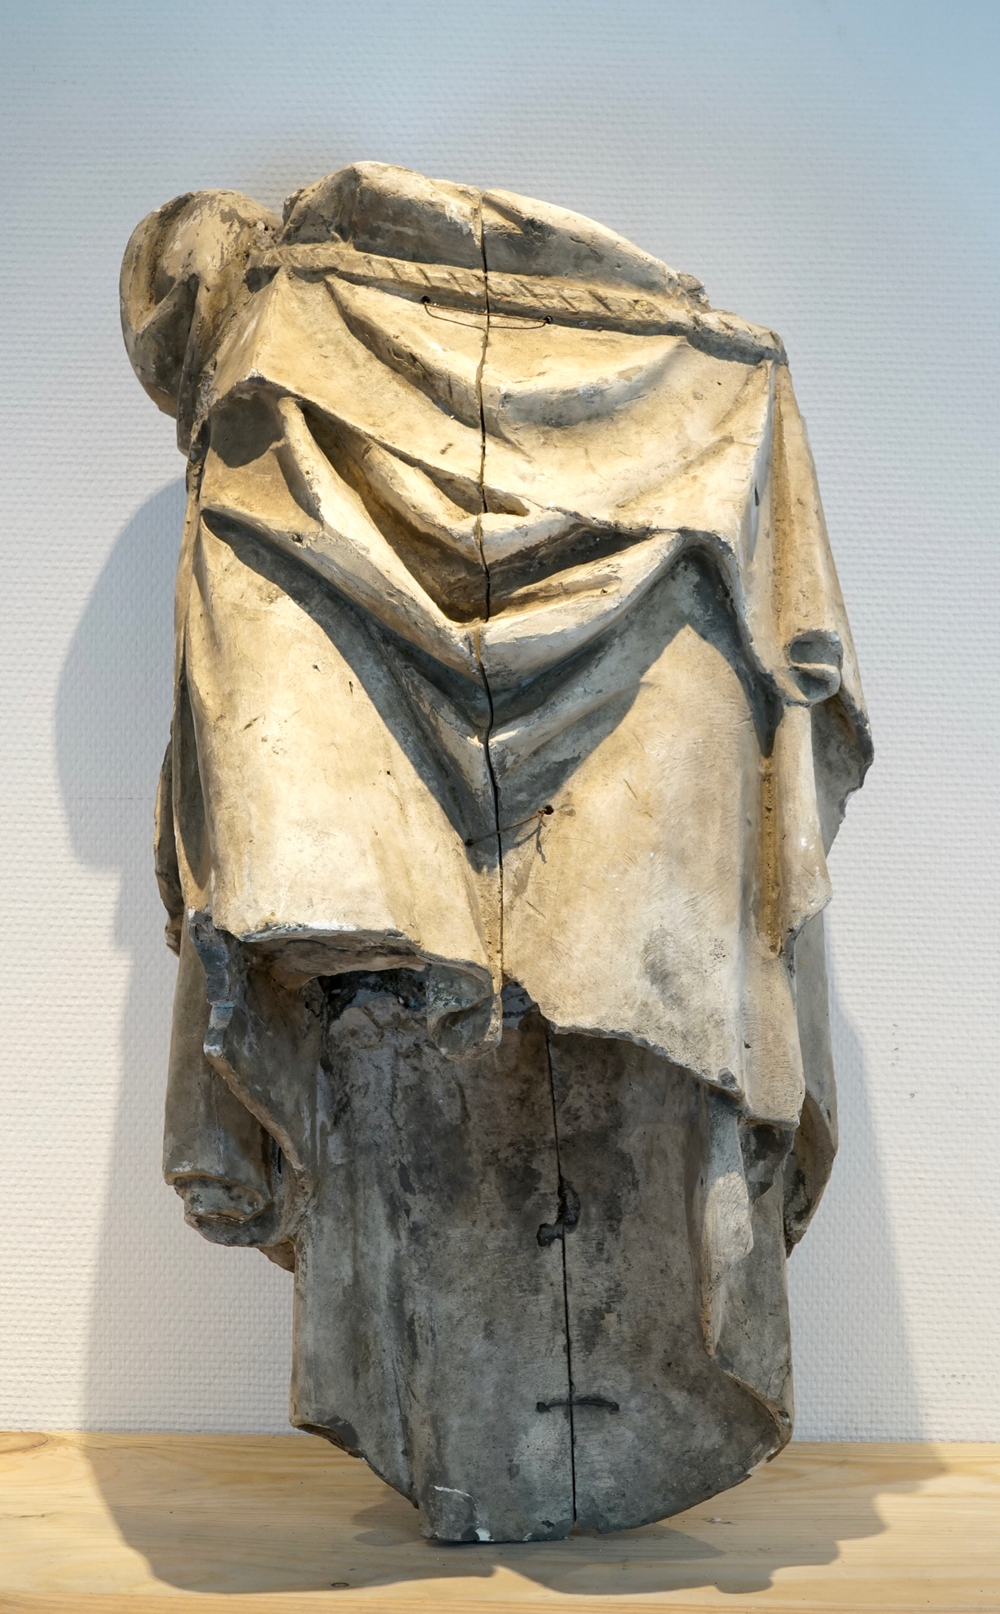 A plaster cast of a lower body skirt, 19/20th C., Bruges